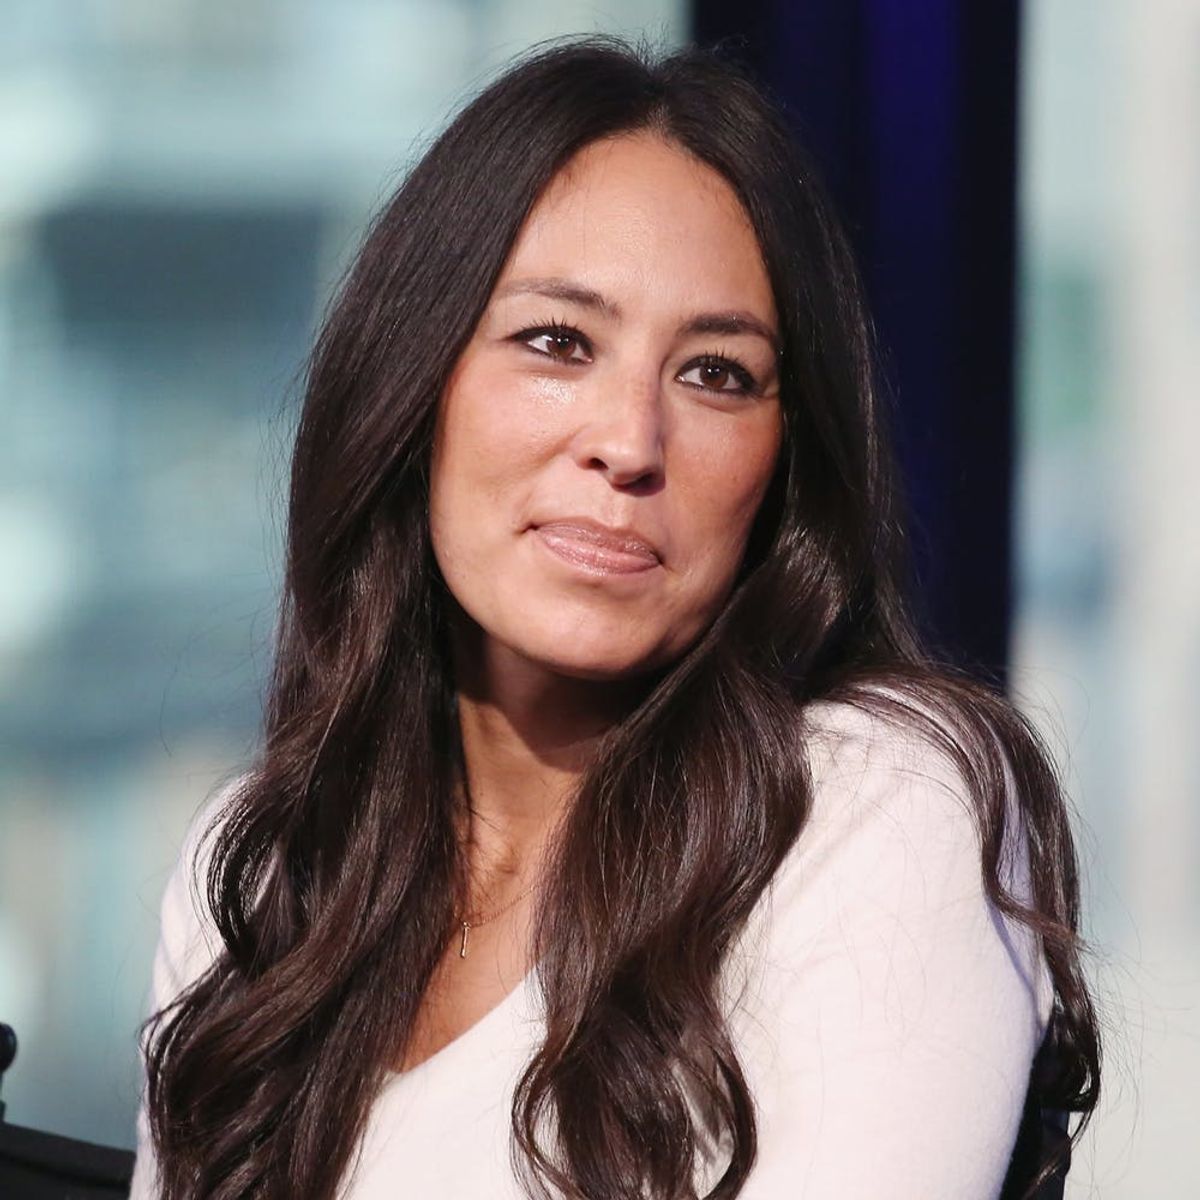 Joanna Gaines Reflects on the Meaning of ‘Home’ as She Finishes Her First Design Book